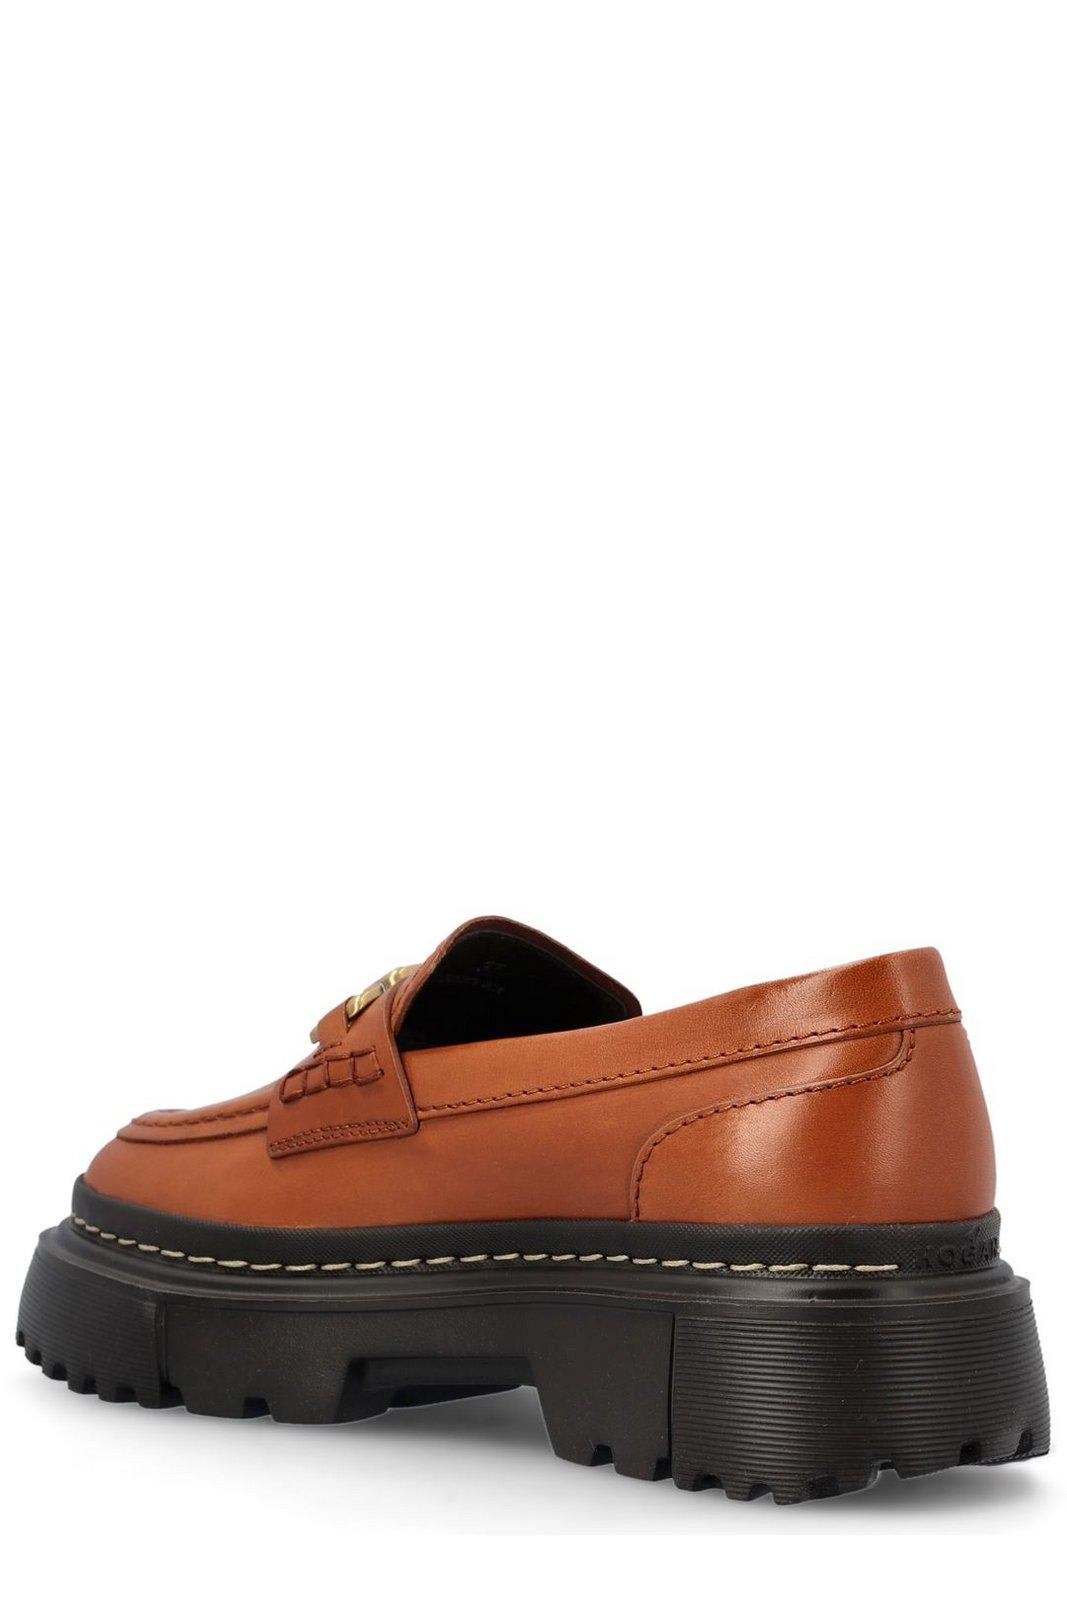 Shop Hogan H619 Slip-on Loafers  In Luggage